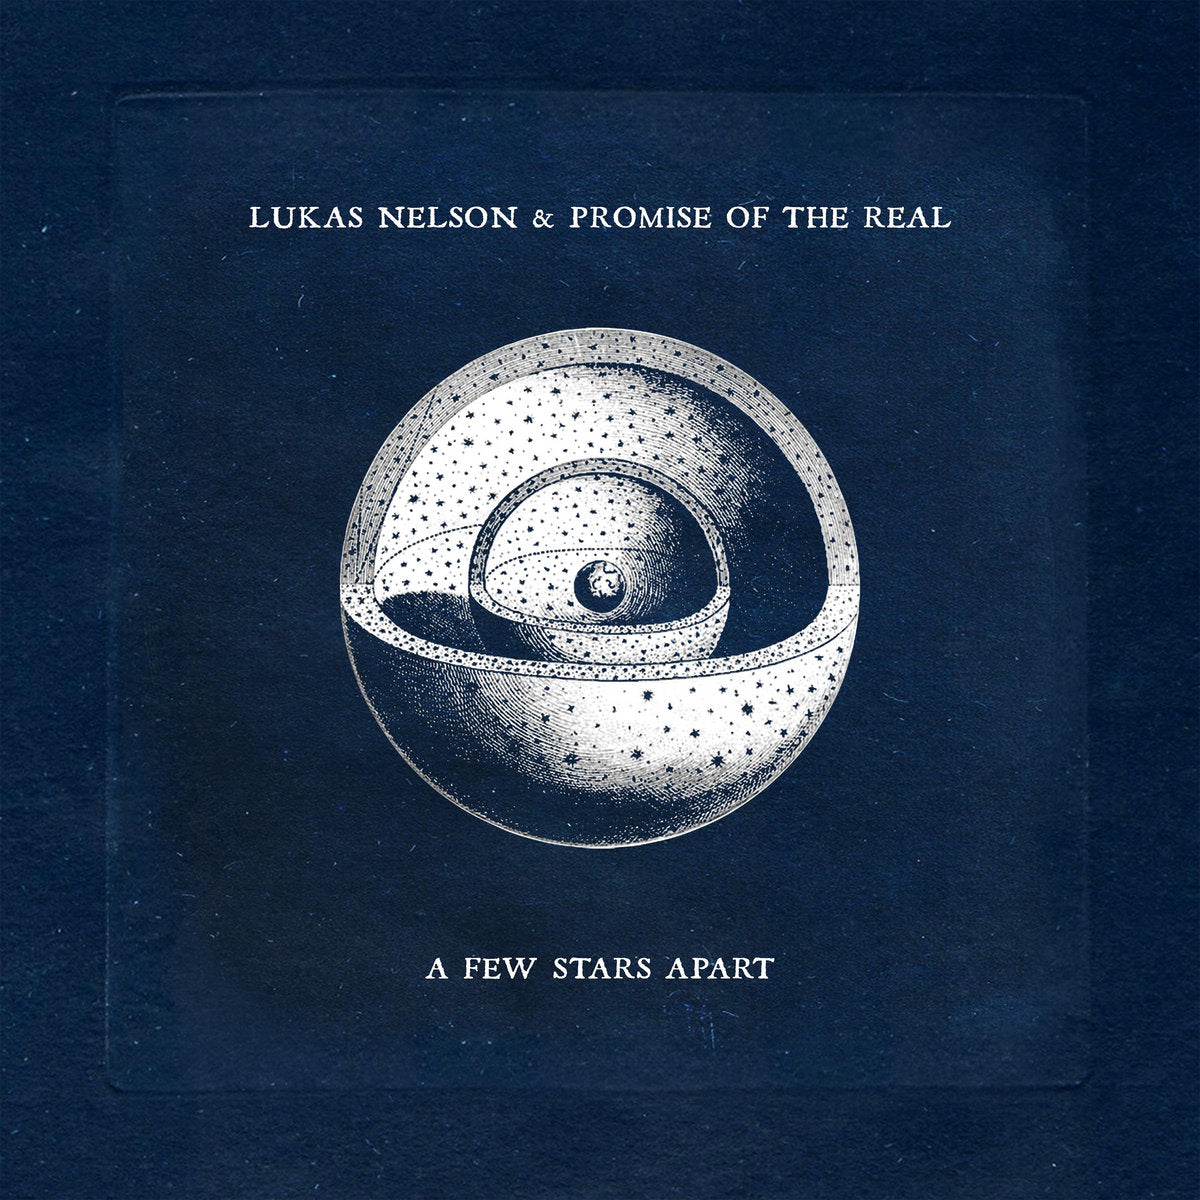 LUKAS NELSON & PROMISE OF THE REAL - A Few Stars Apart - LP - Vinyl